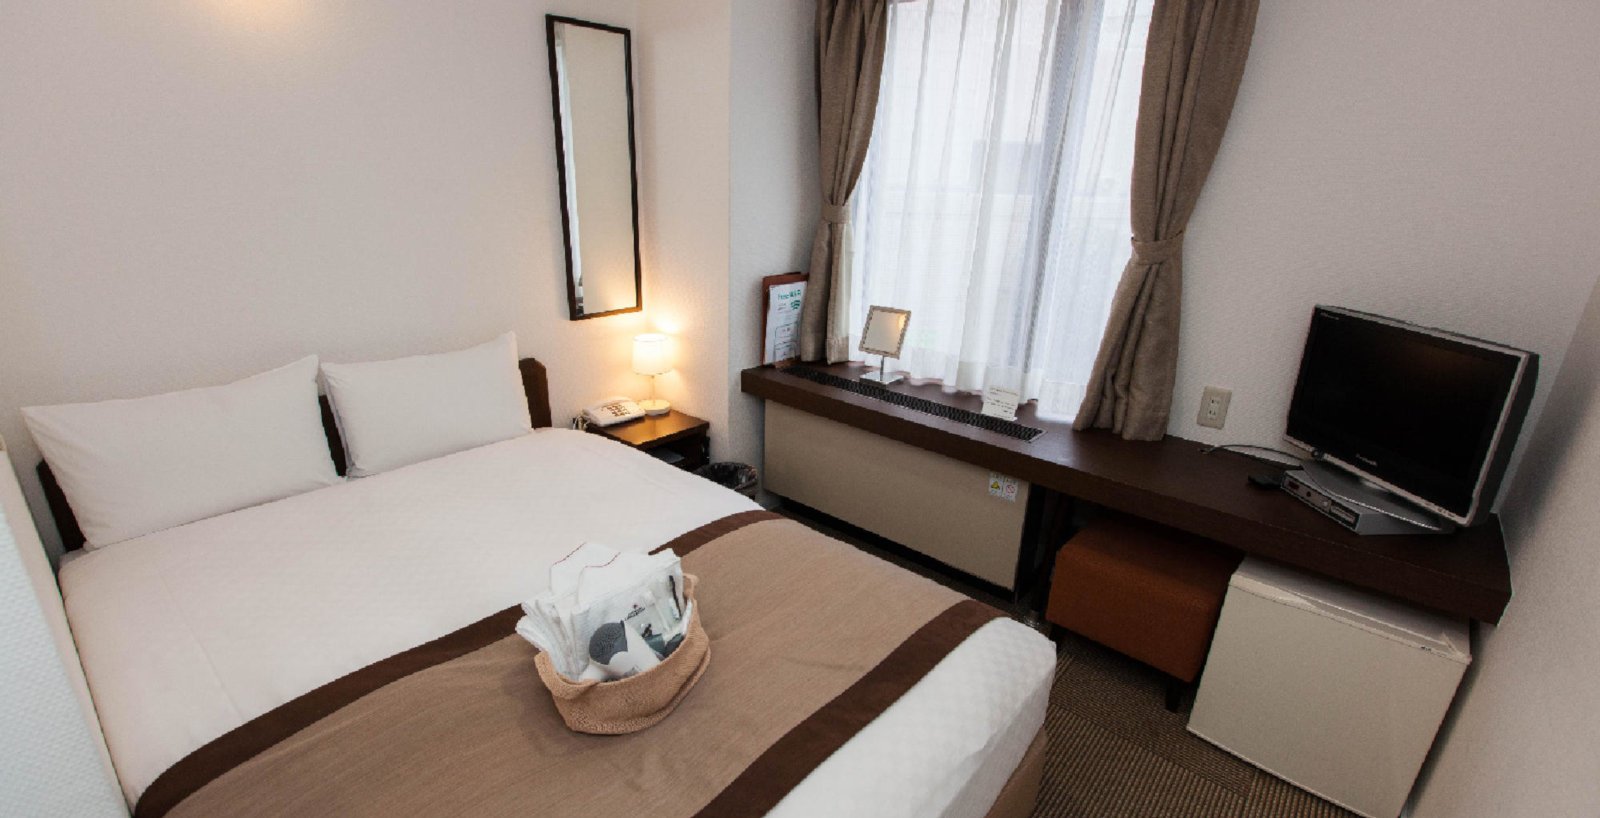 Gay hotels in Tokyo - City Hotel Lonestar is clean and cosy and perfect for budget travellers.